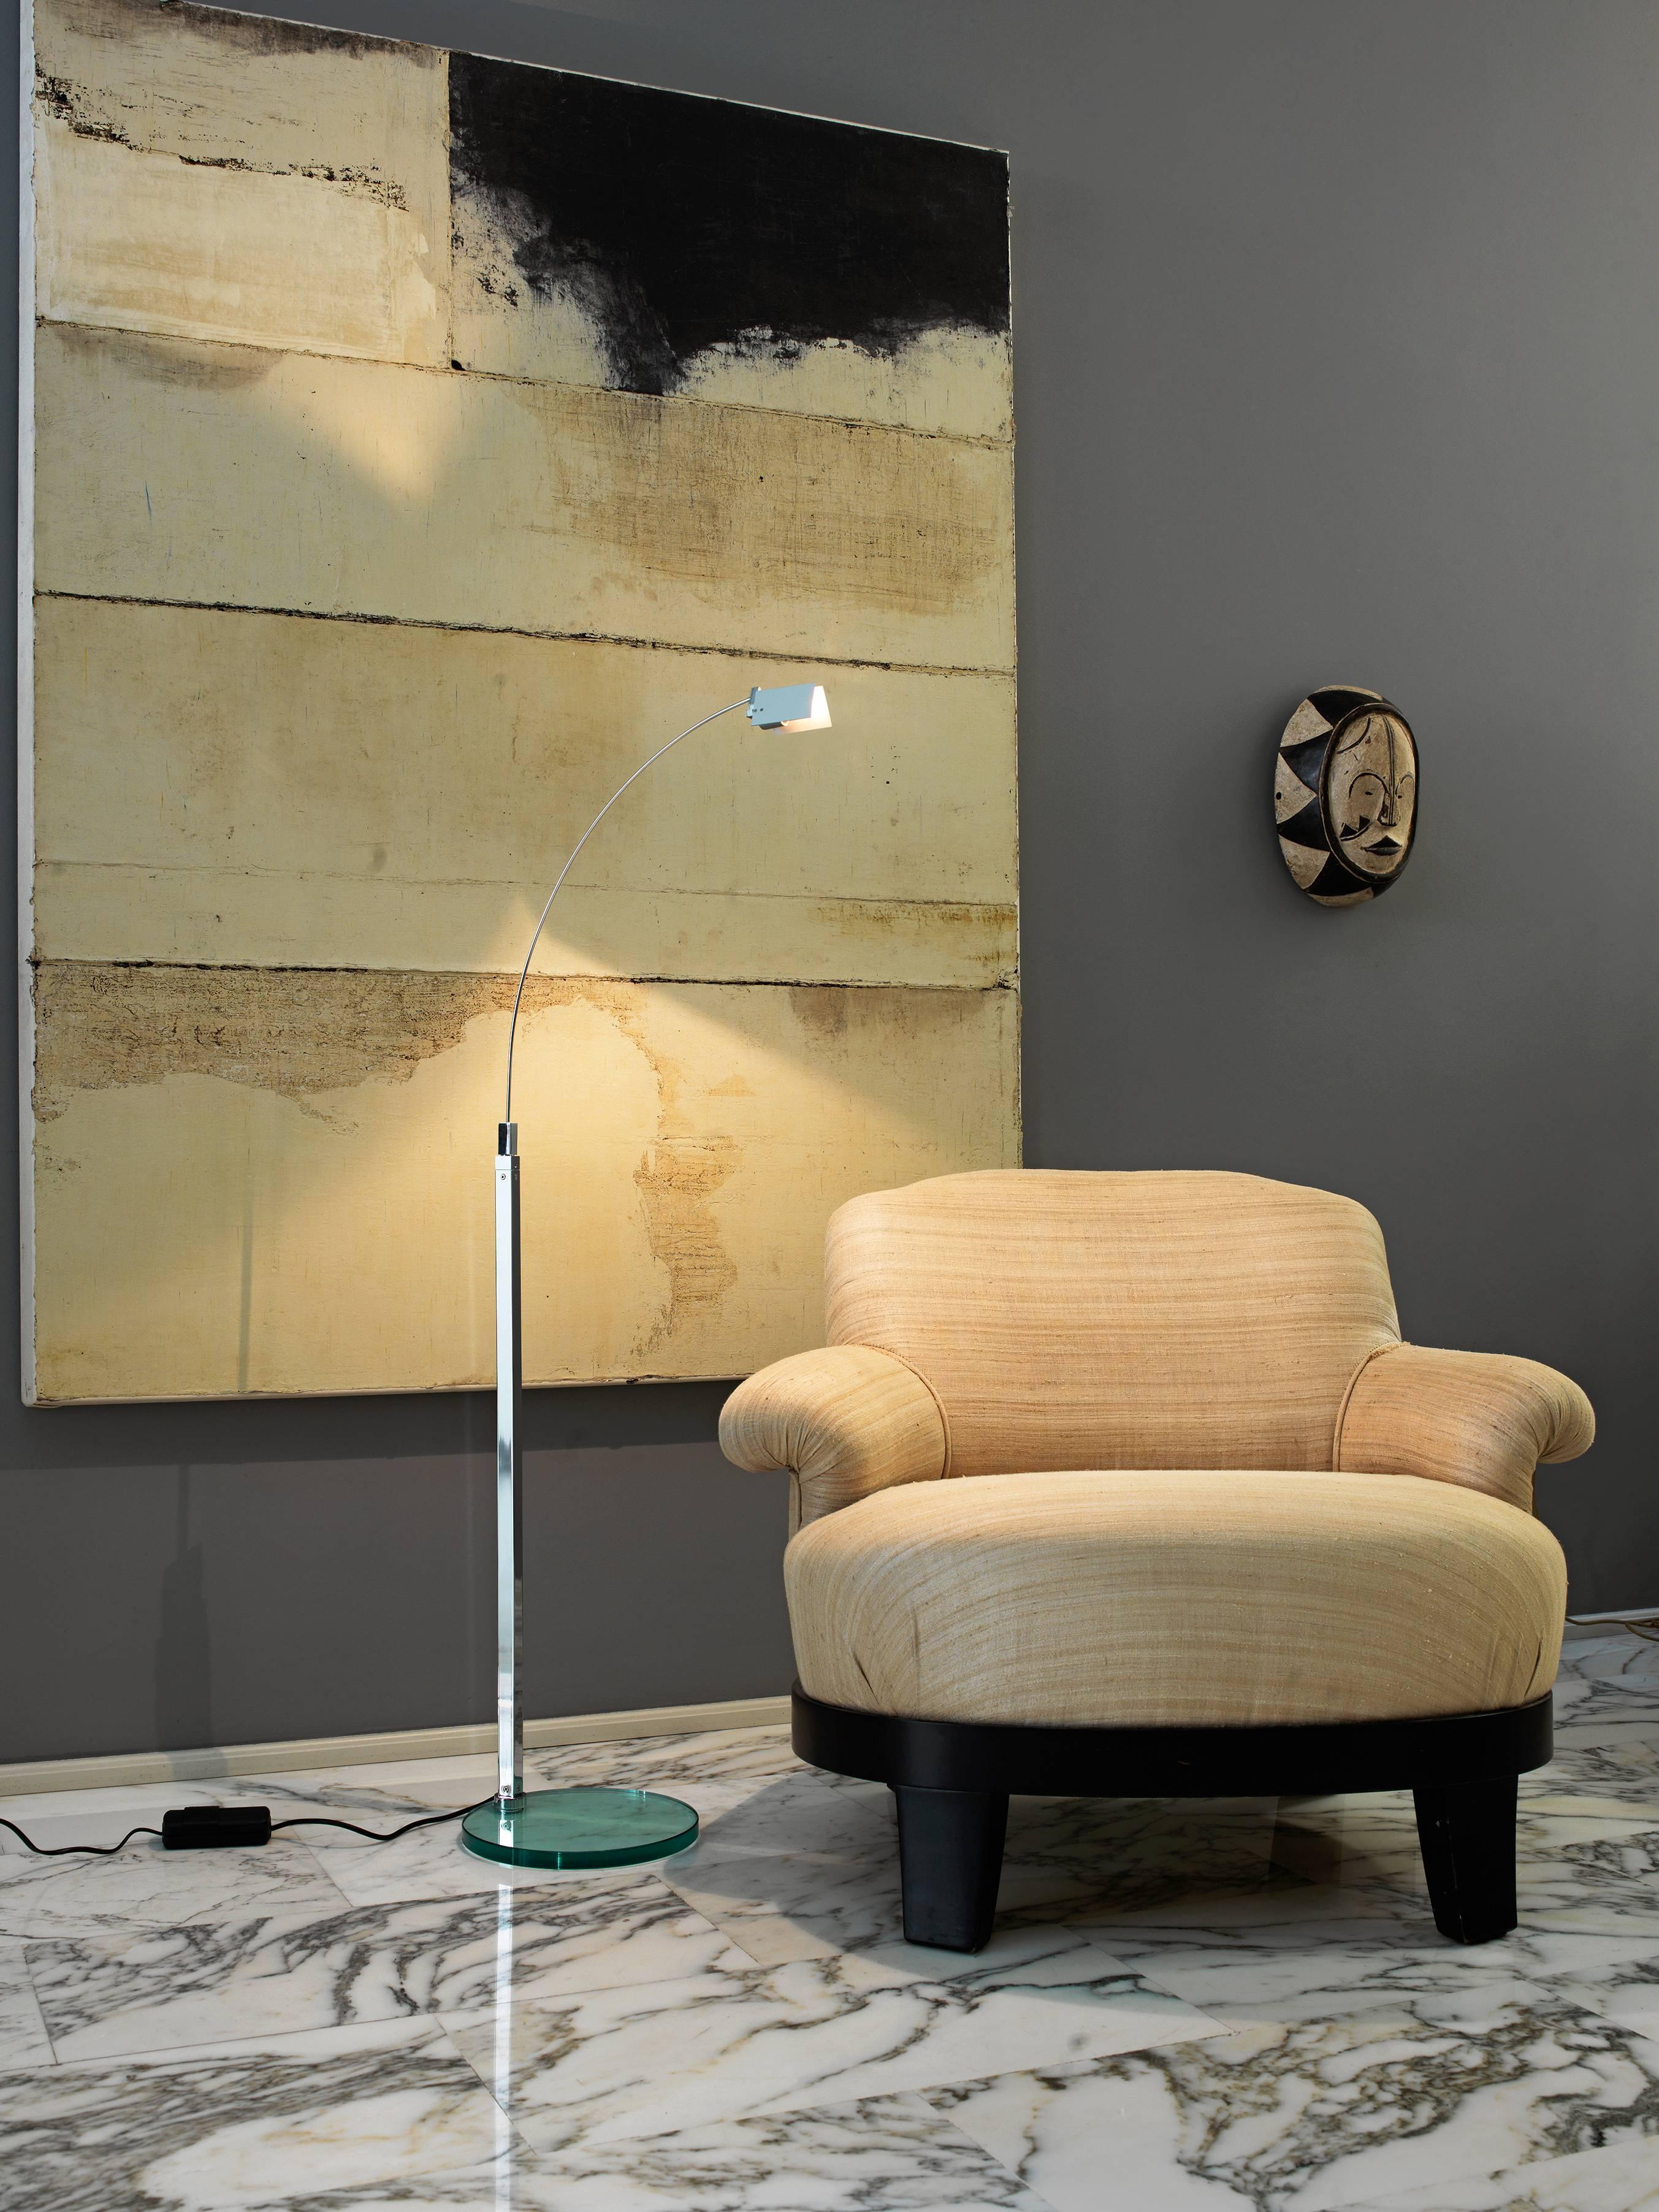 Designed by Alvaro Siza and manufactured by Fontana Arte, the Falena floor lamp is made in chromed metal and designed in 1994. It is a representation of lightness and elegance for this family of lamps designed by Alvaro Siza and available in floor,